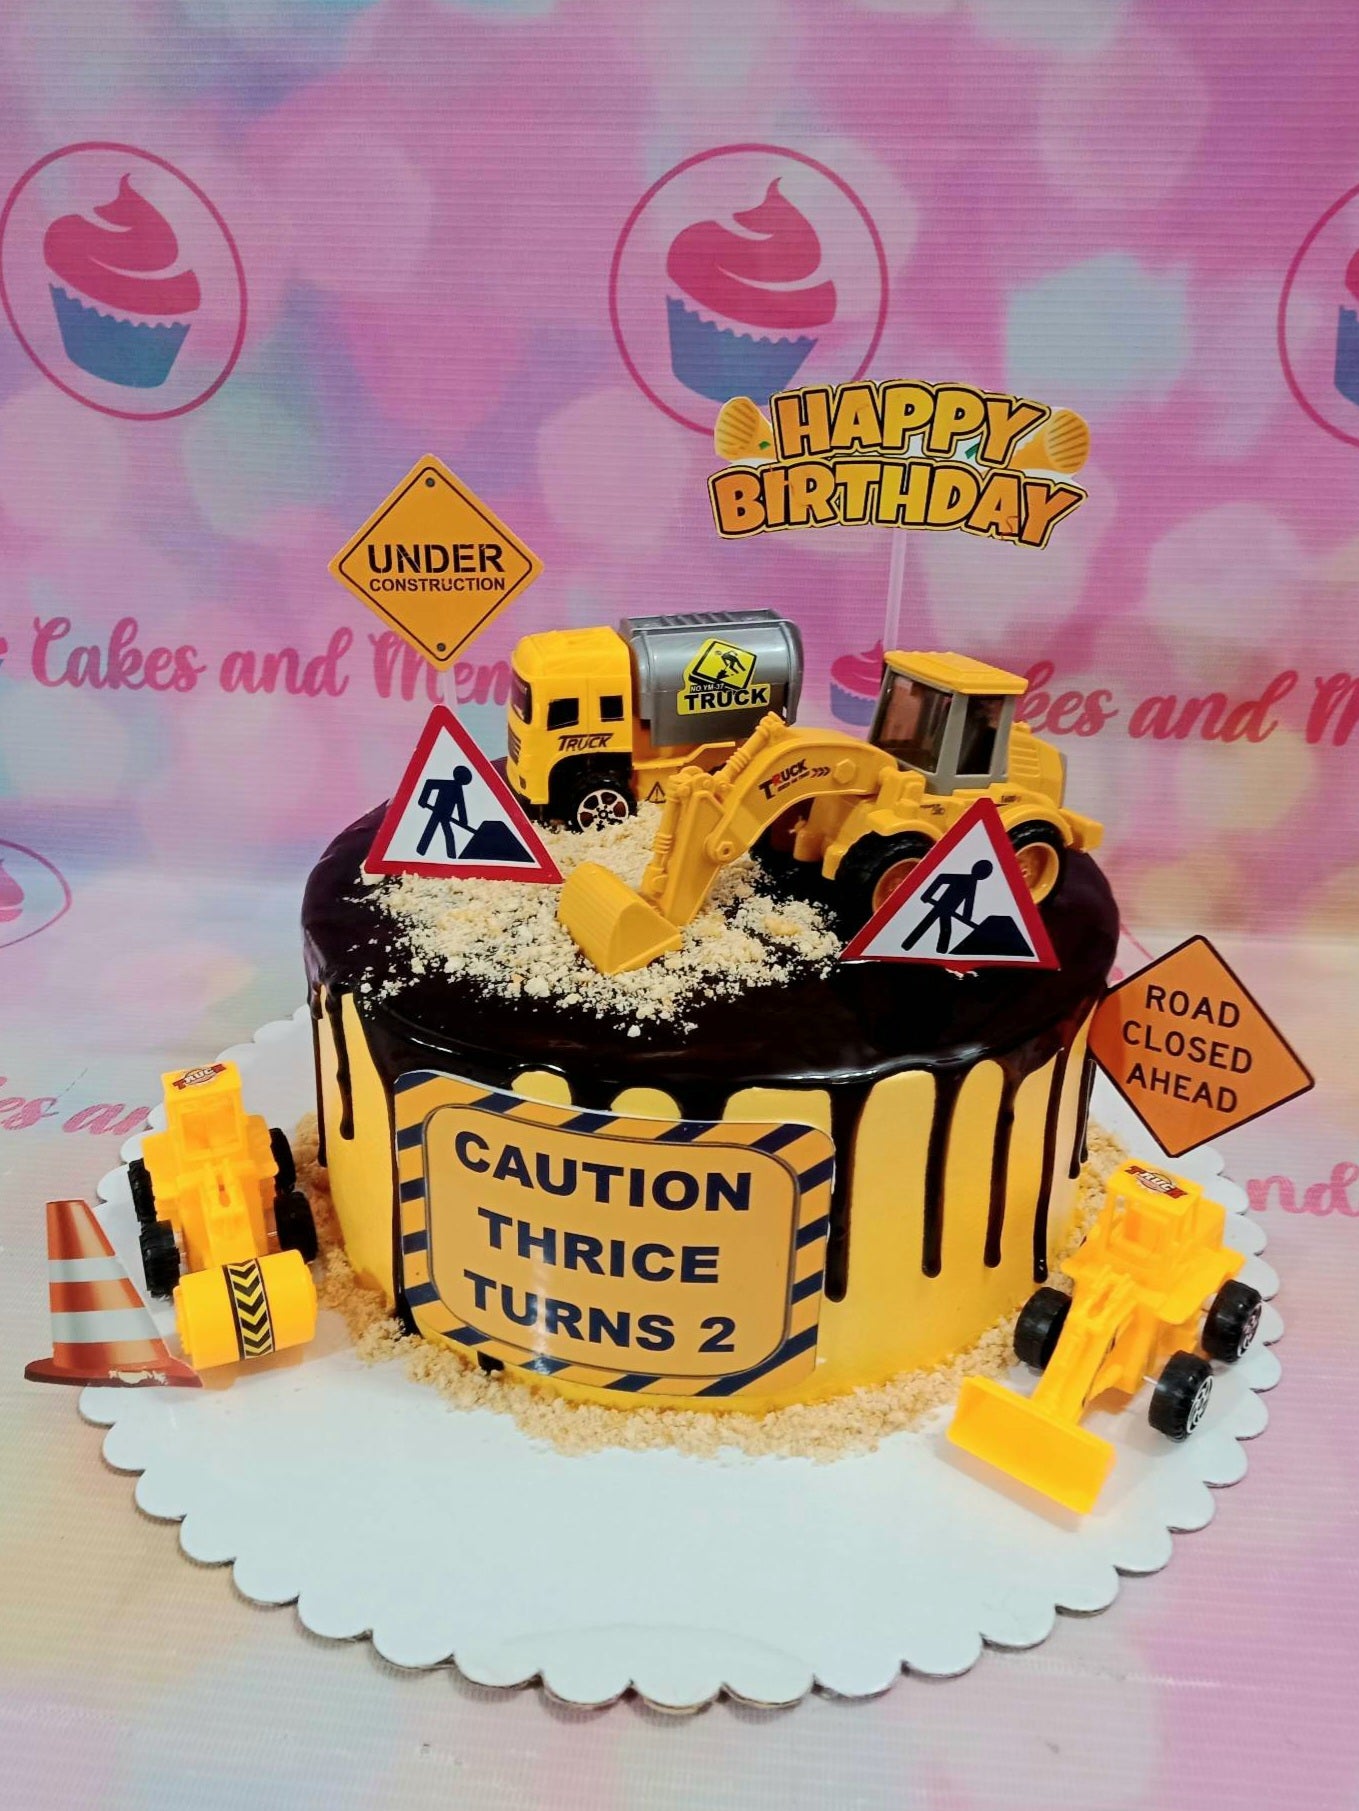 This beautiful custom construction cake is perfect for any birthday celebration. It features a realistic yellow truck with buildable toys and is finished off with a delicious chocolate drip. Each cake is handcrafted and customized to your specifcations.